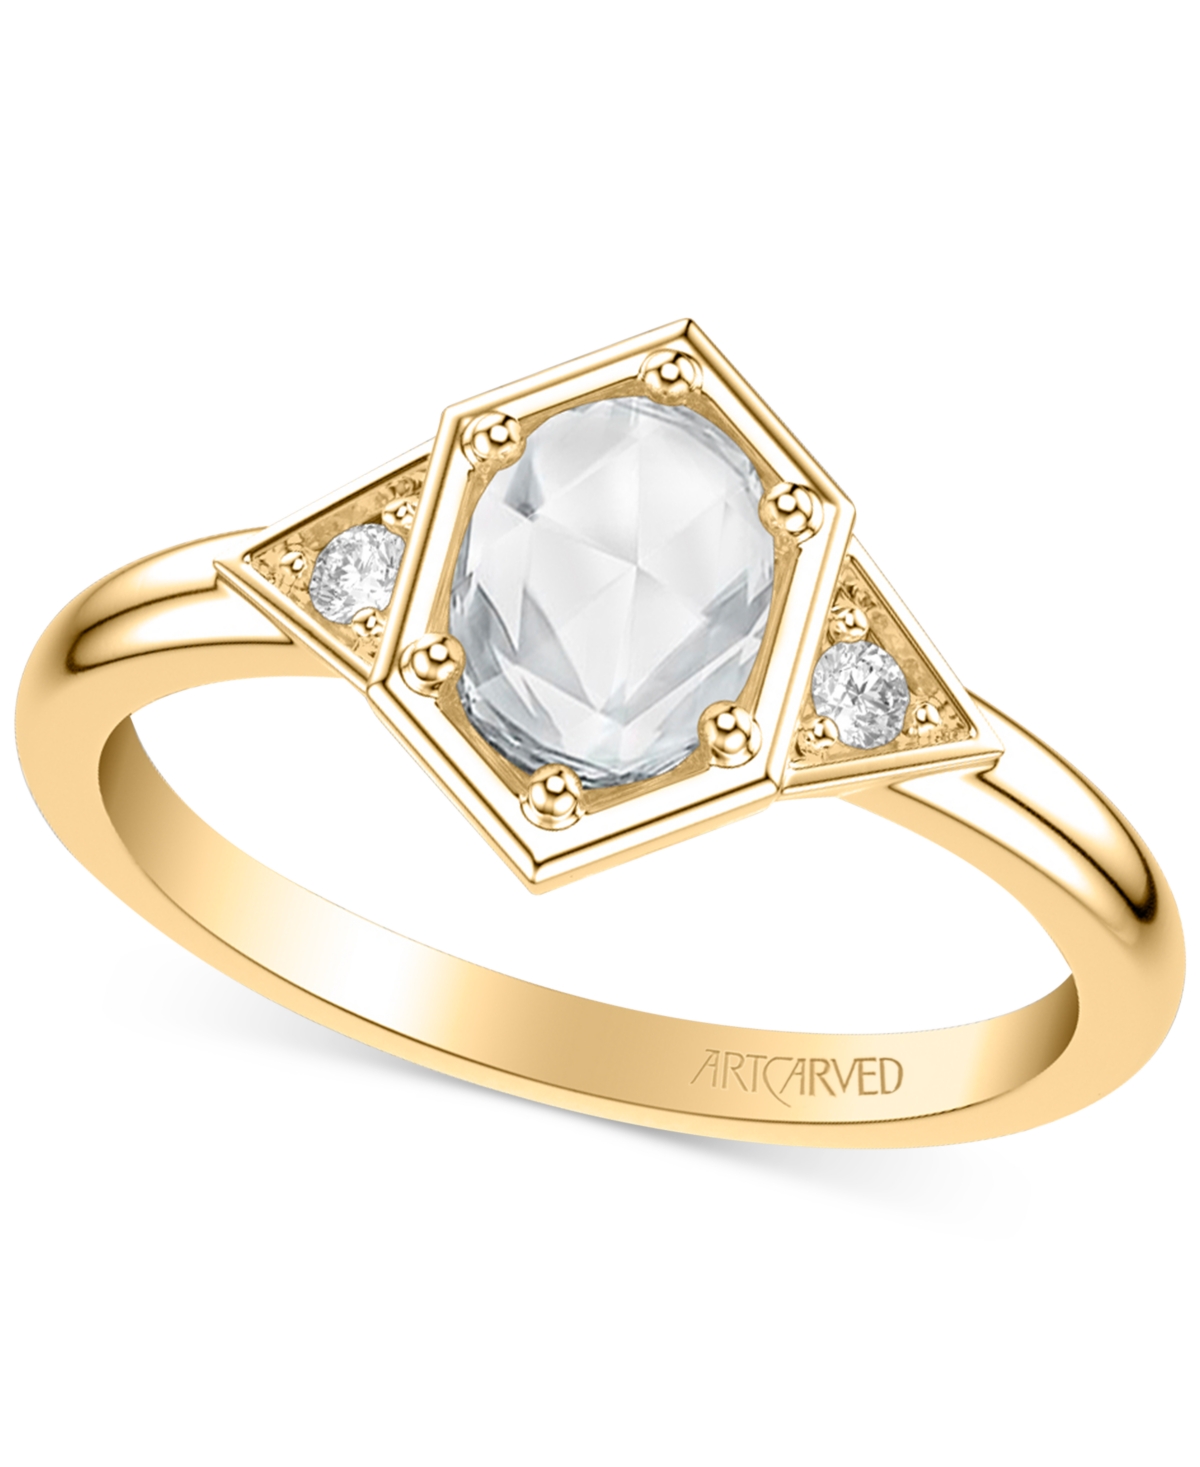 Artcarved Art Carved Diamond Oval Rose-Cut Engagement Ring (1/2 ct. t.w.) in 14k White, Yellow or Rose Gold